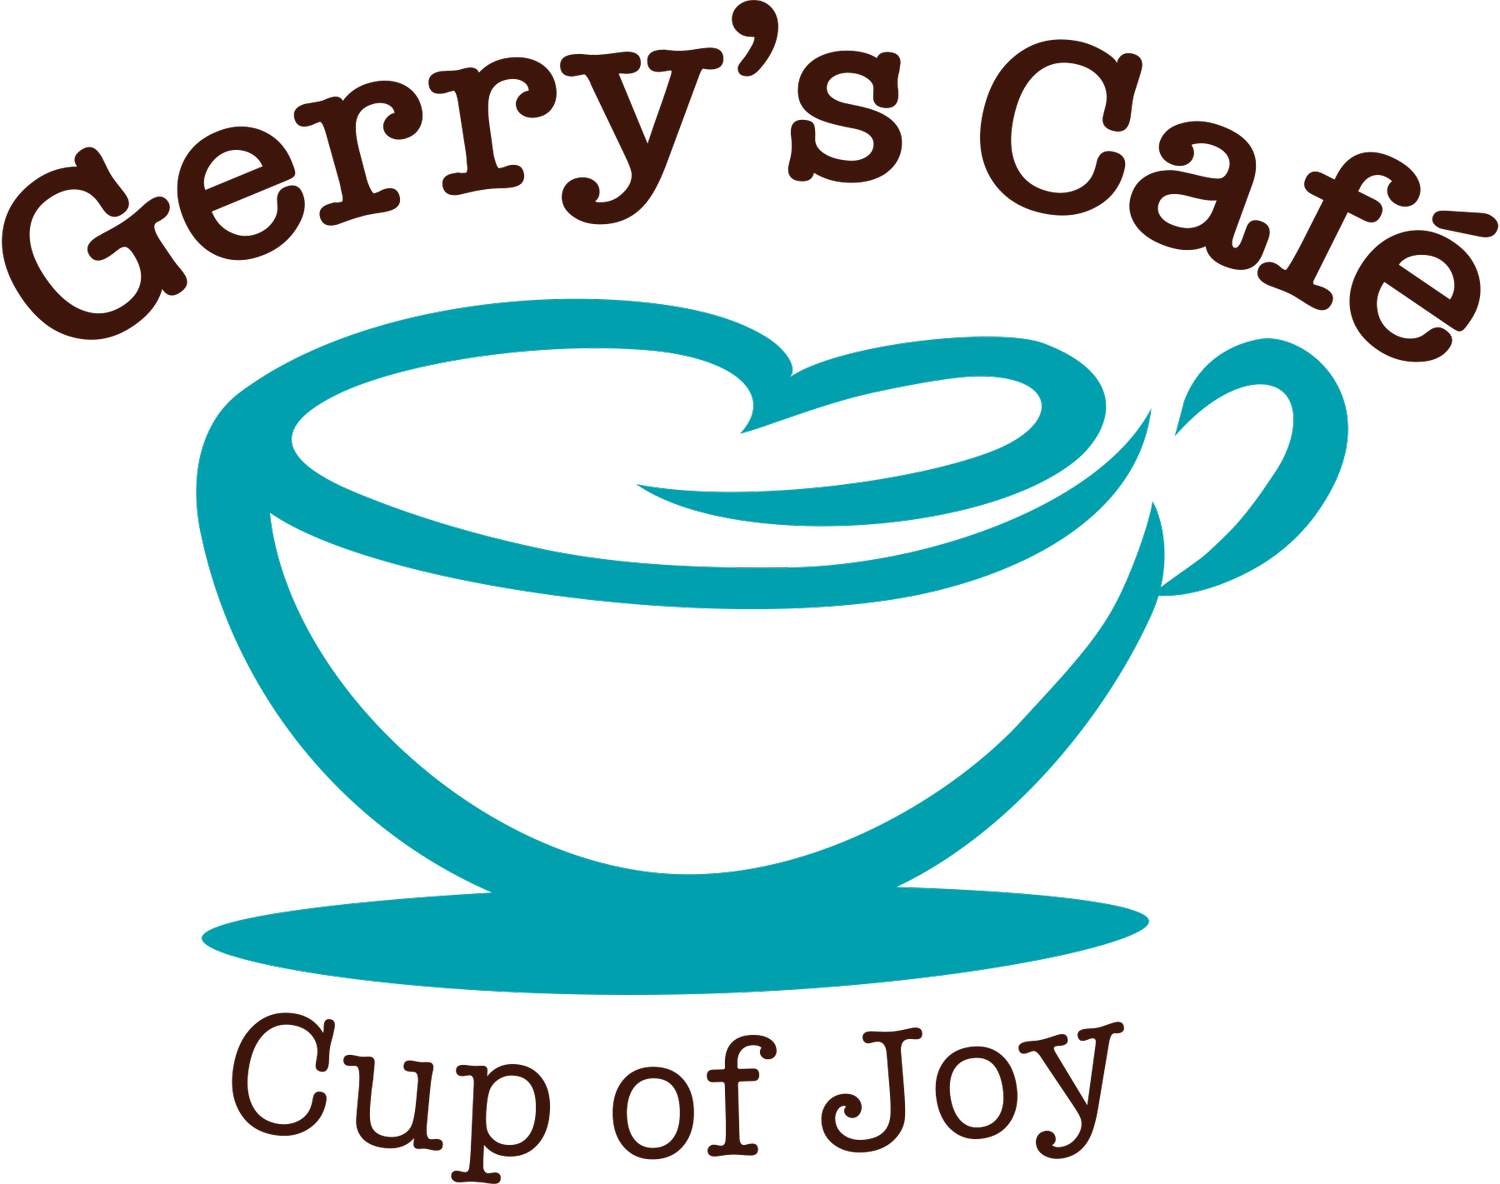 Gerry&#39;s Cafe | Cup of Joy